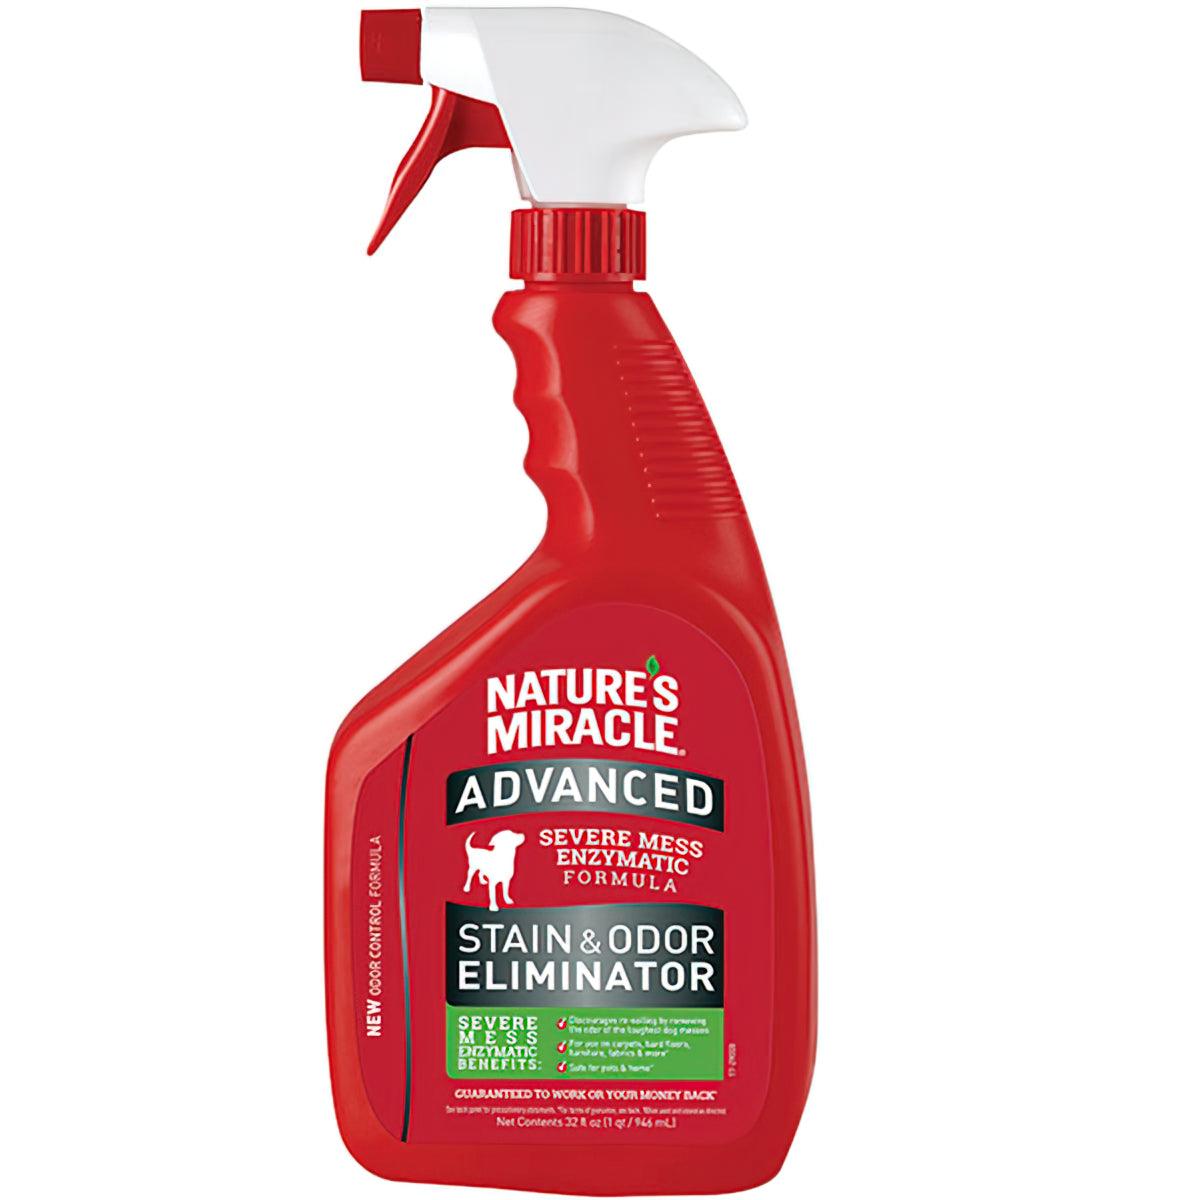 Nature's Miracle Advanced Stain and Odor Eliminator Spary for Dogs - 946ml - PAWS CLUB